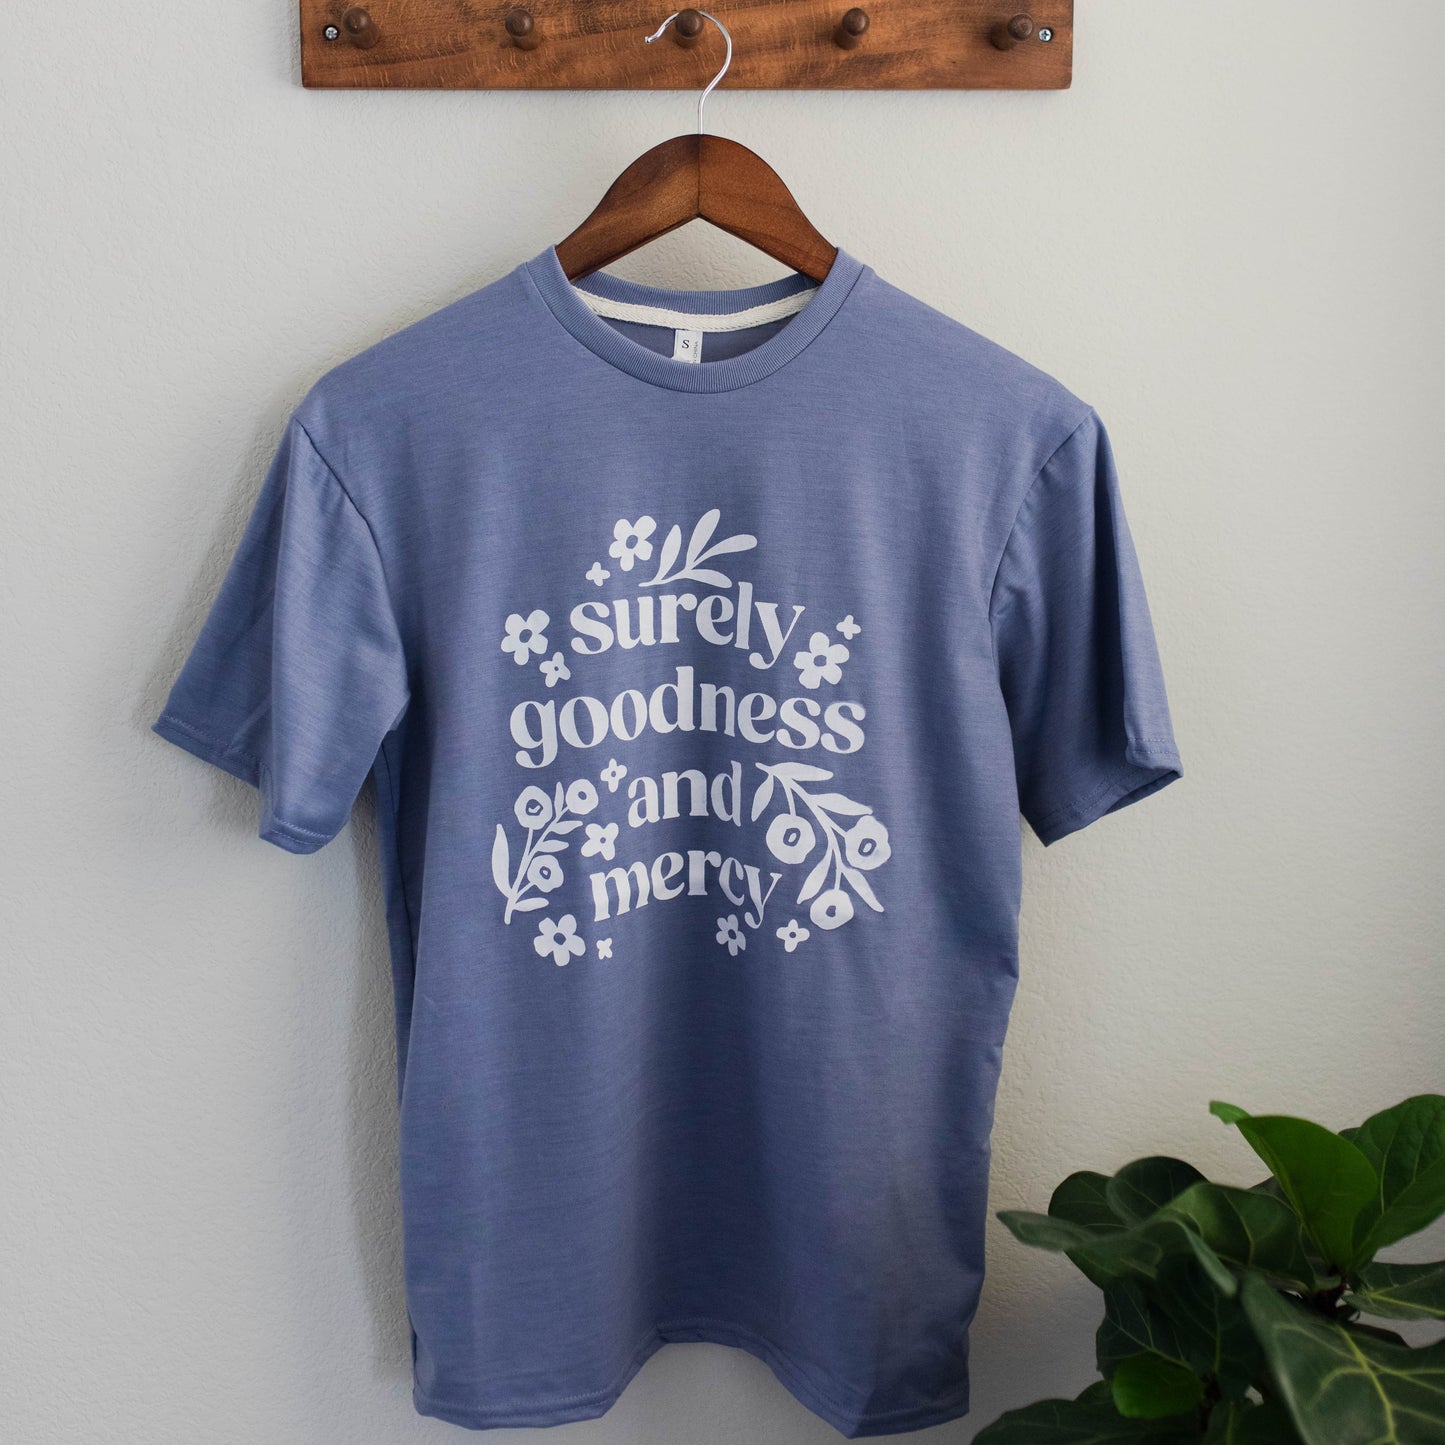 Goodness and Mercy Tee